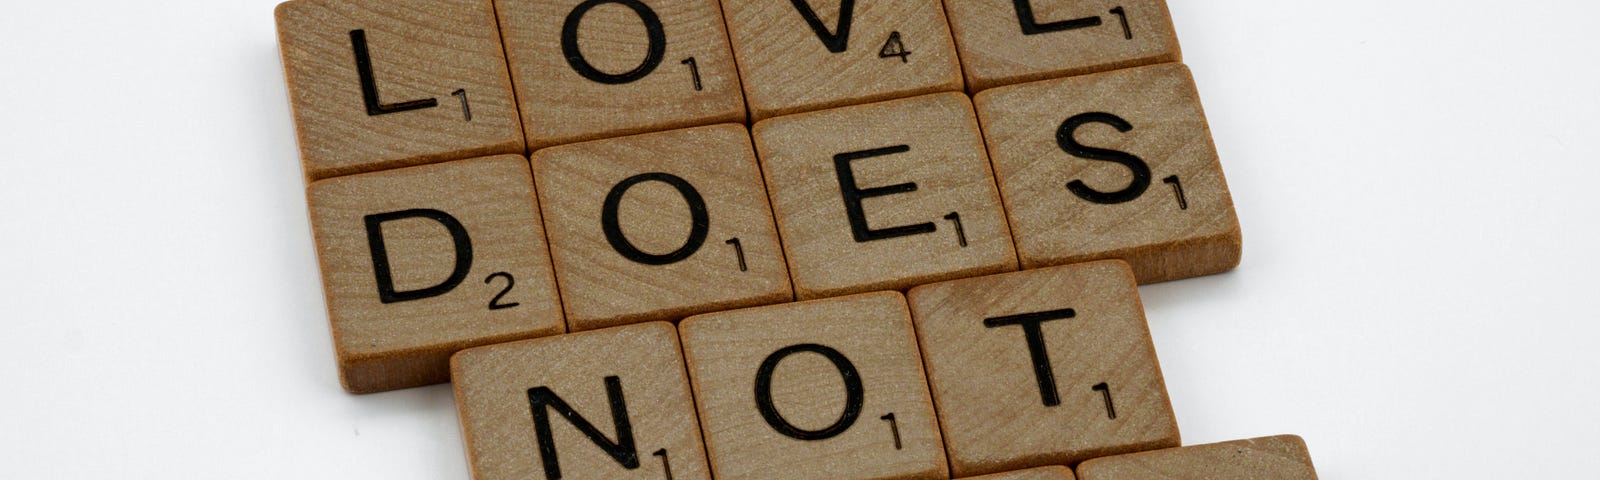 Scrabble tiles that spell the words on top of each other, “LOVE DOES NOT ENVY”